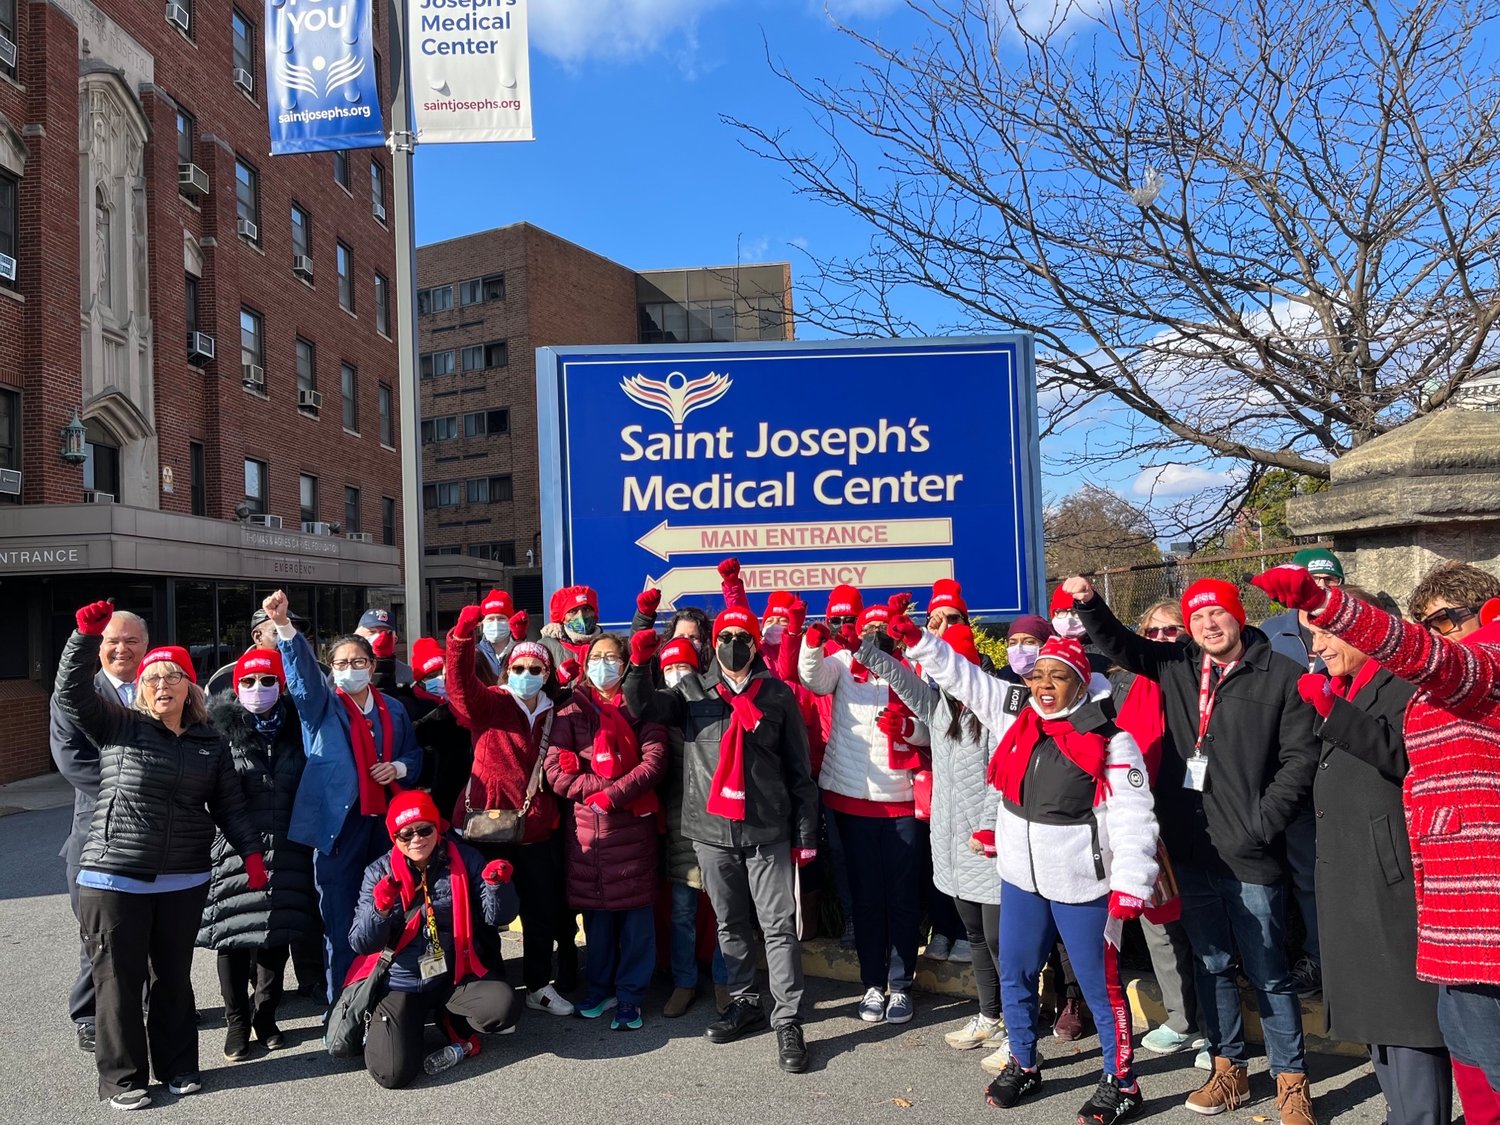 Nurses at St. Joseph's Medical Center have been bargaining for a new contract for three years and rallied Nov. 18 for safe-staffing, particularly in the emergency and ICU units. Nurses at the BronxCare Hospital Center at a rally held a day earlier also called for a contract that includes a plan to retain staff.